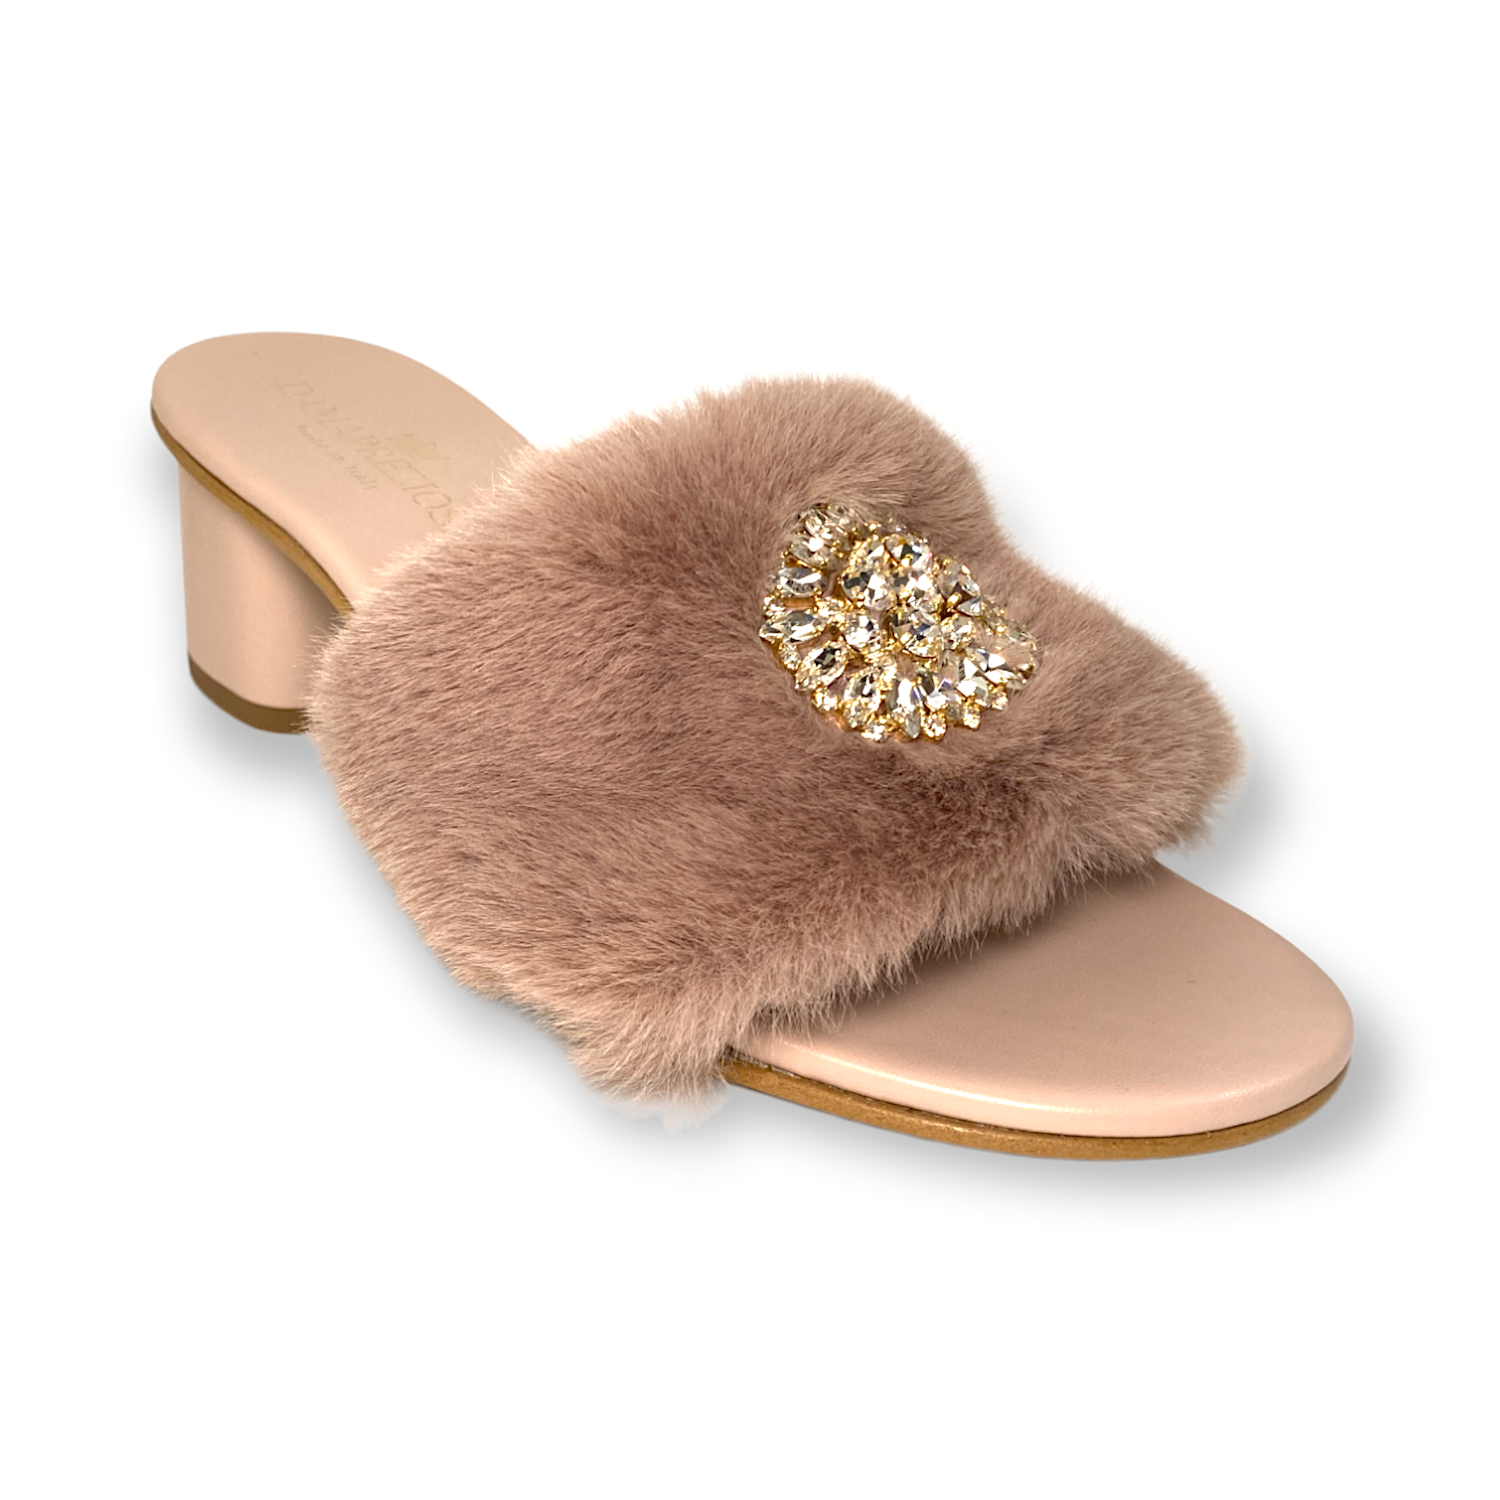 Made in Italy Pink nude soft faux fur and details in tone-on-tone vegan leather embellished with white crystals. Elegant padded insoles in soft pink nude vegan leather to add the comfort you deserve.  5 cm heel covered in nude pink vegan leather.  Damapreziosa logo engraved on soles and insoles. Glittery sole.  PETA approved vegan product, made with non-leather materials following our cruelty-free ethics. Plastic-free, recycled paper boxes and packaging, and organic cotton dust bag